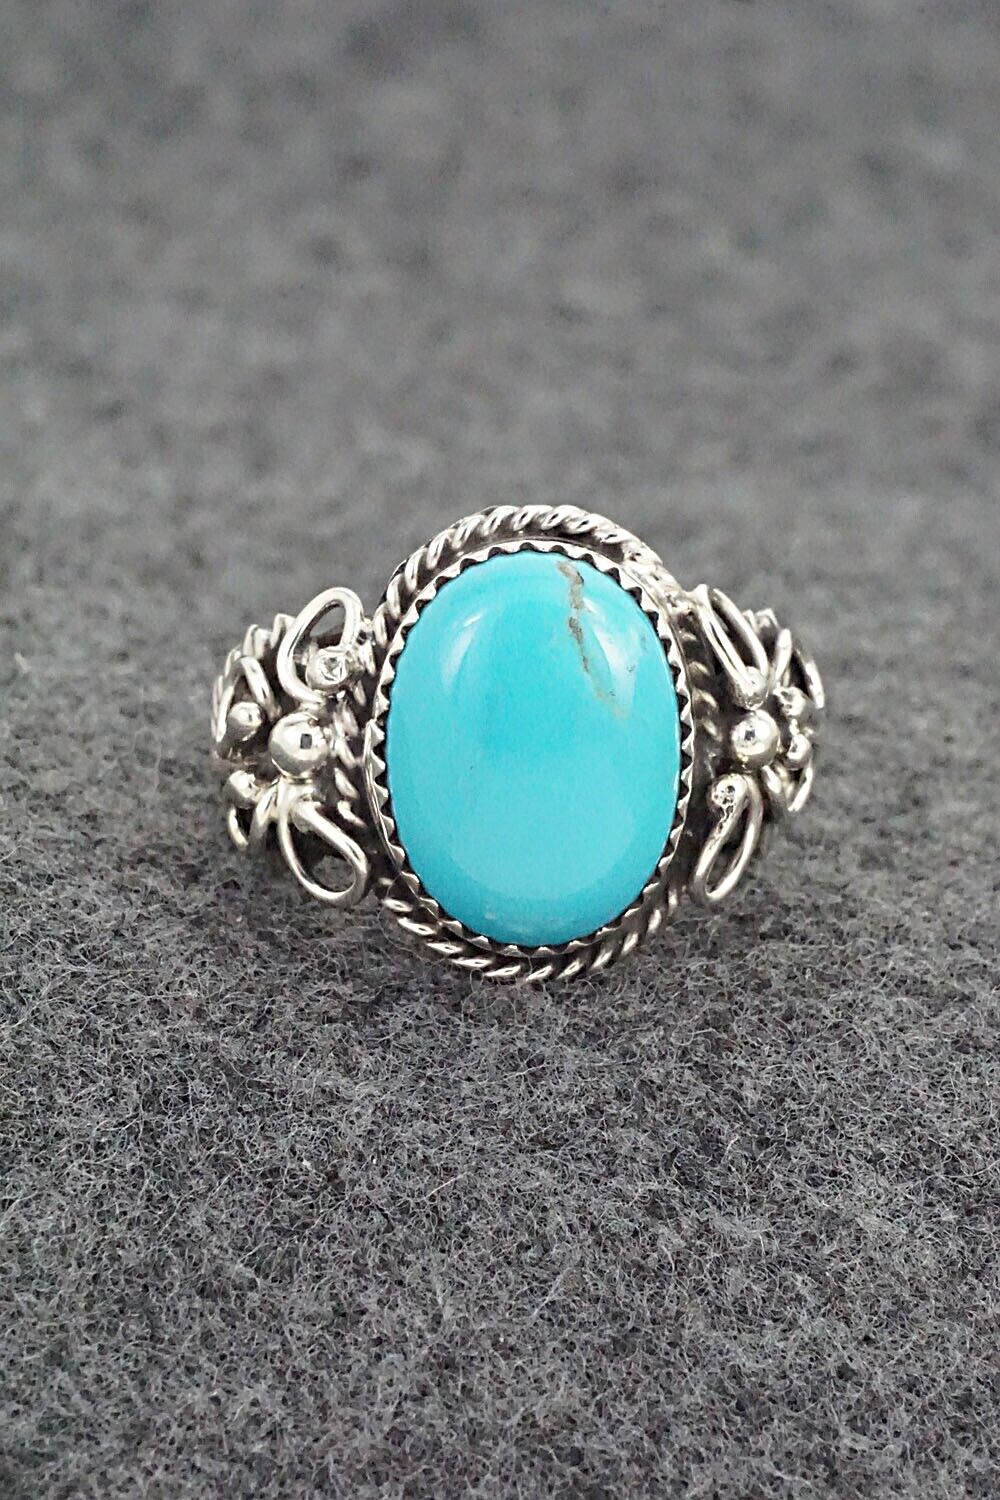 Turquoise & Sterling Silver Ring - Jeannette Saunders - Size 9